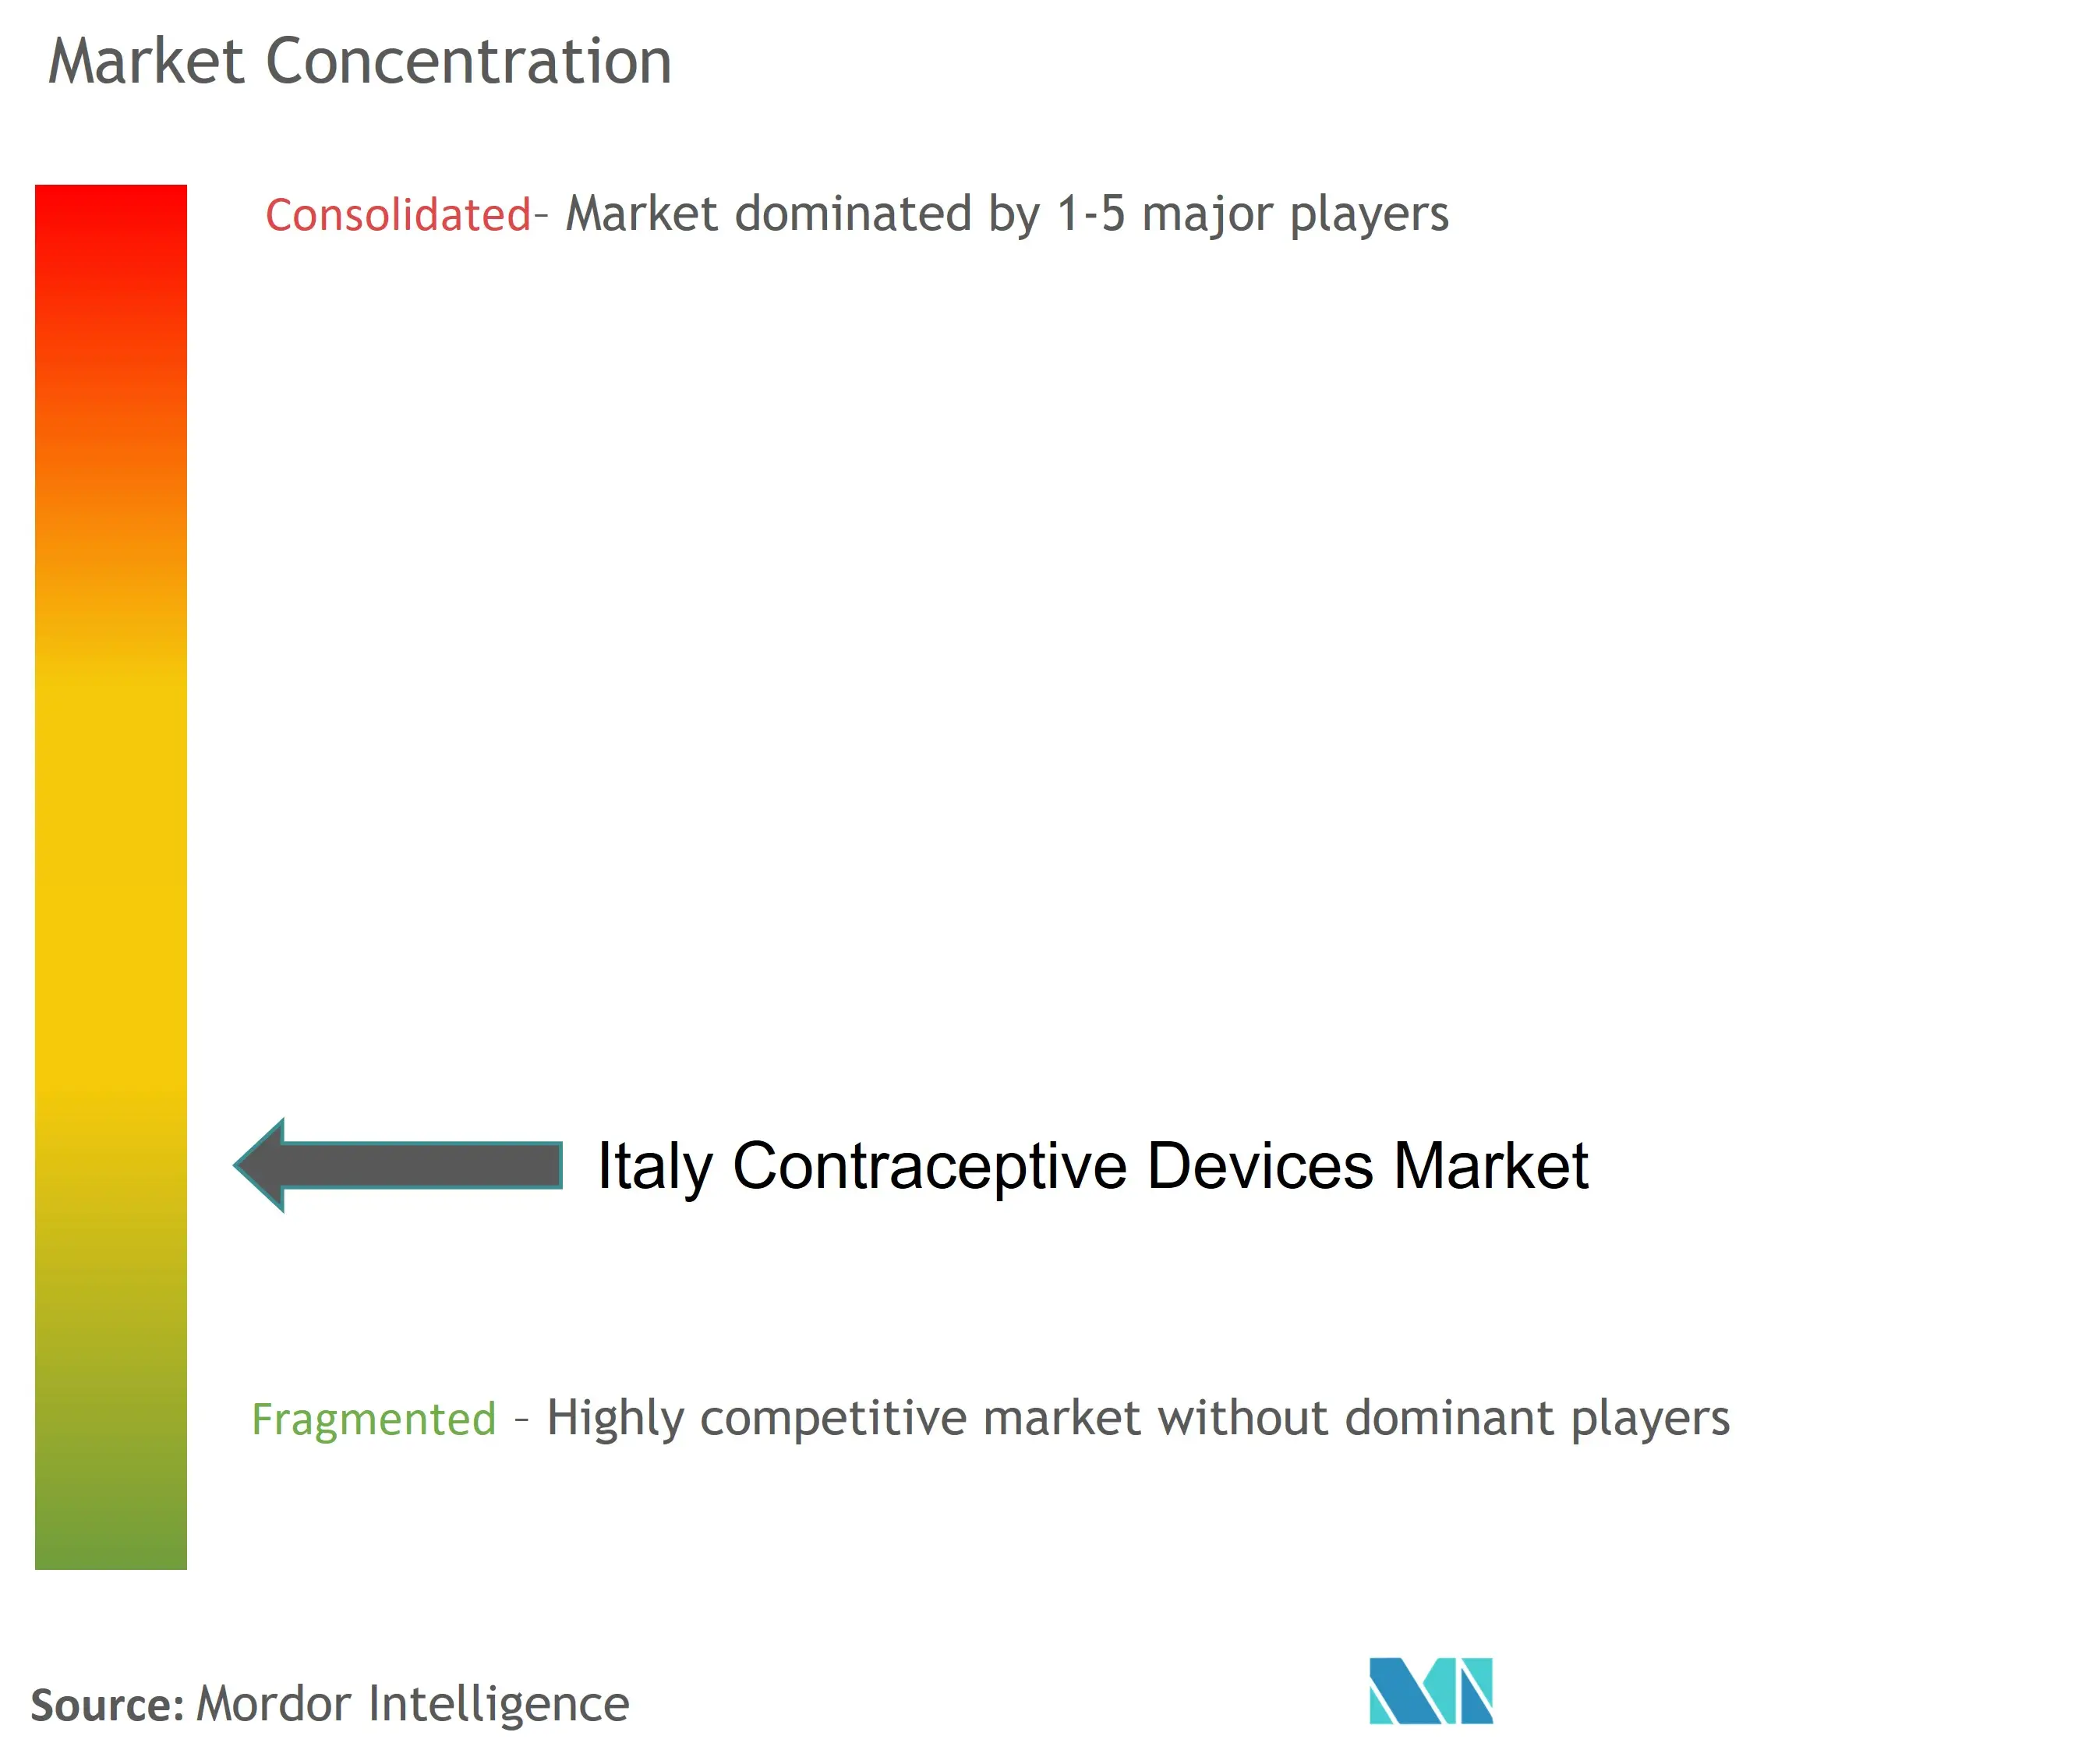 Italy Contraceptive Devices Market Concentration